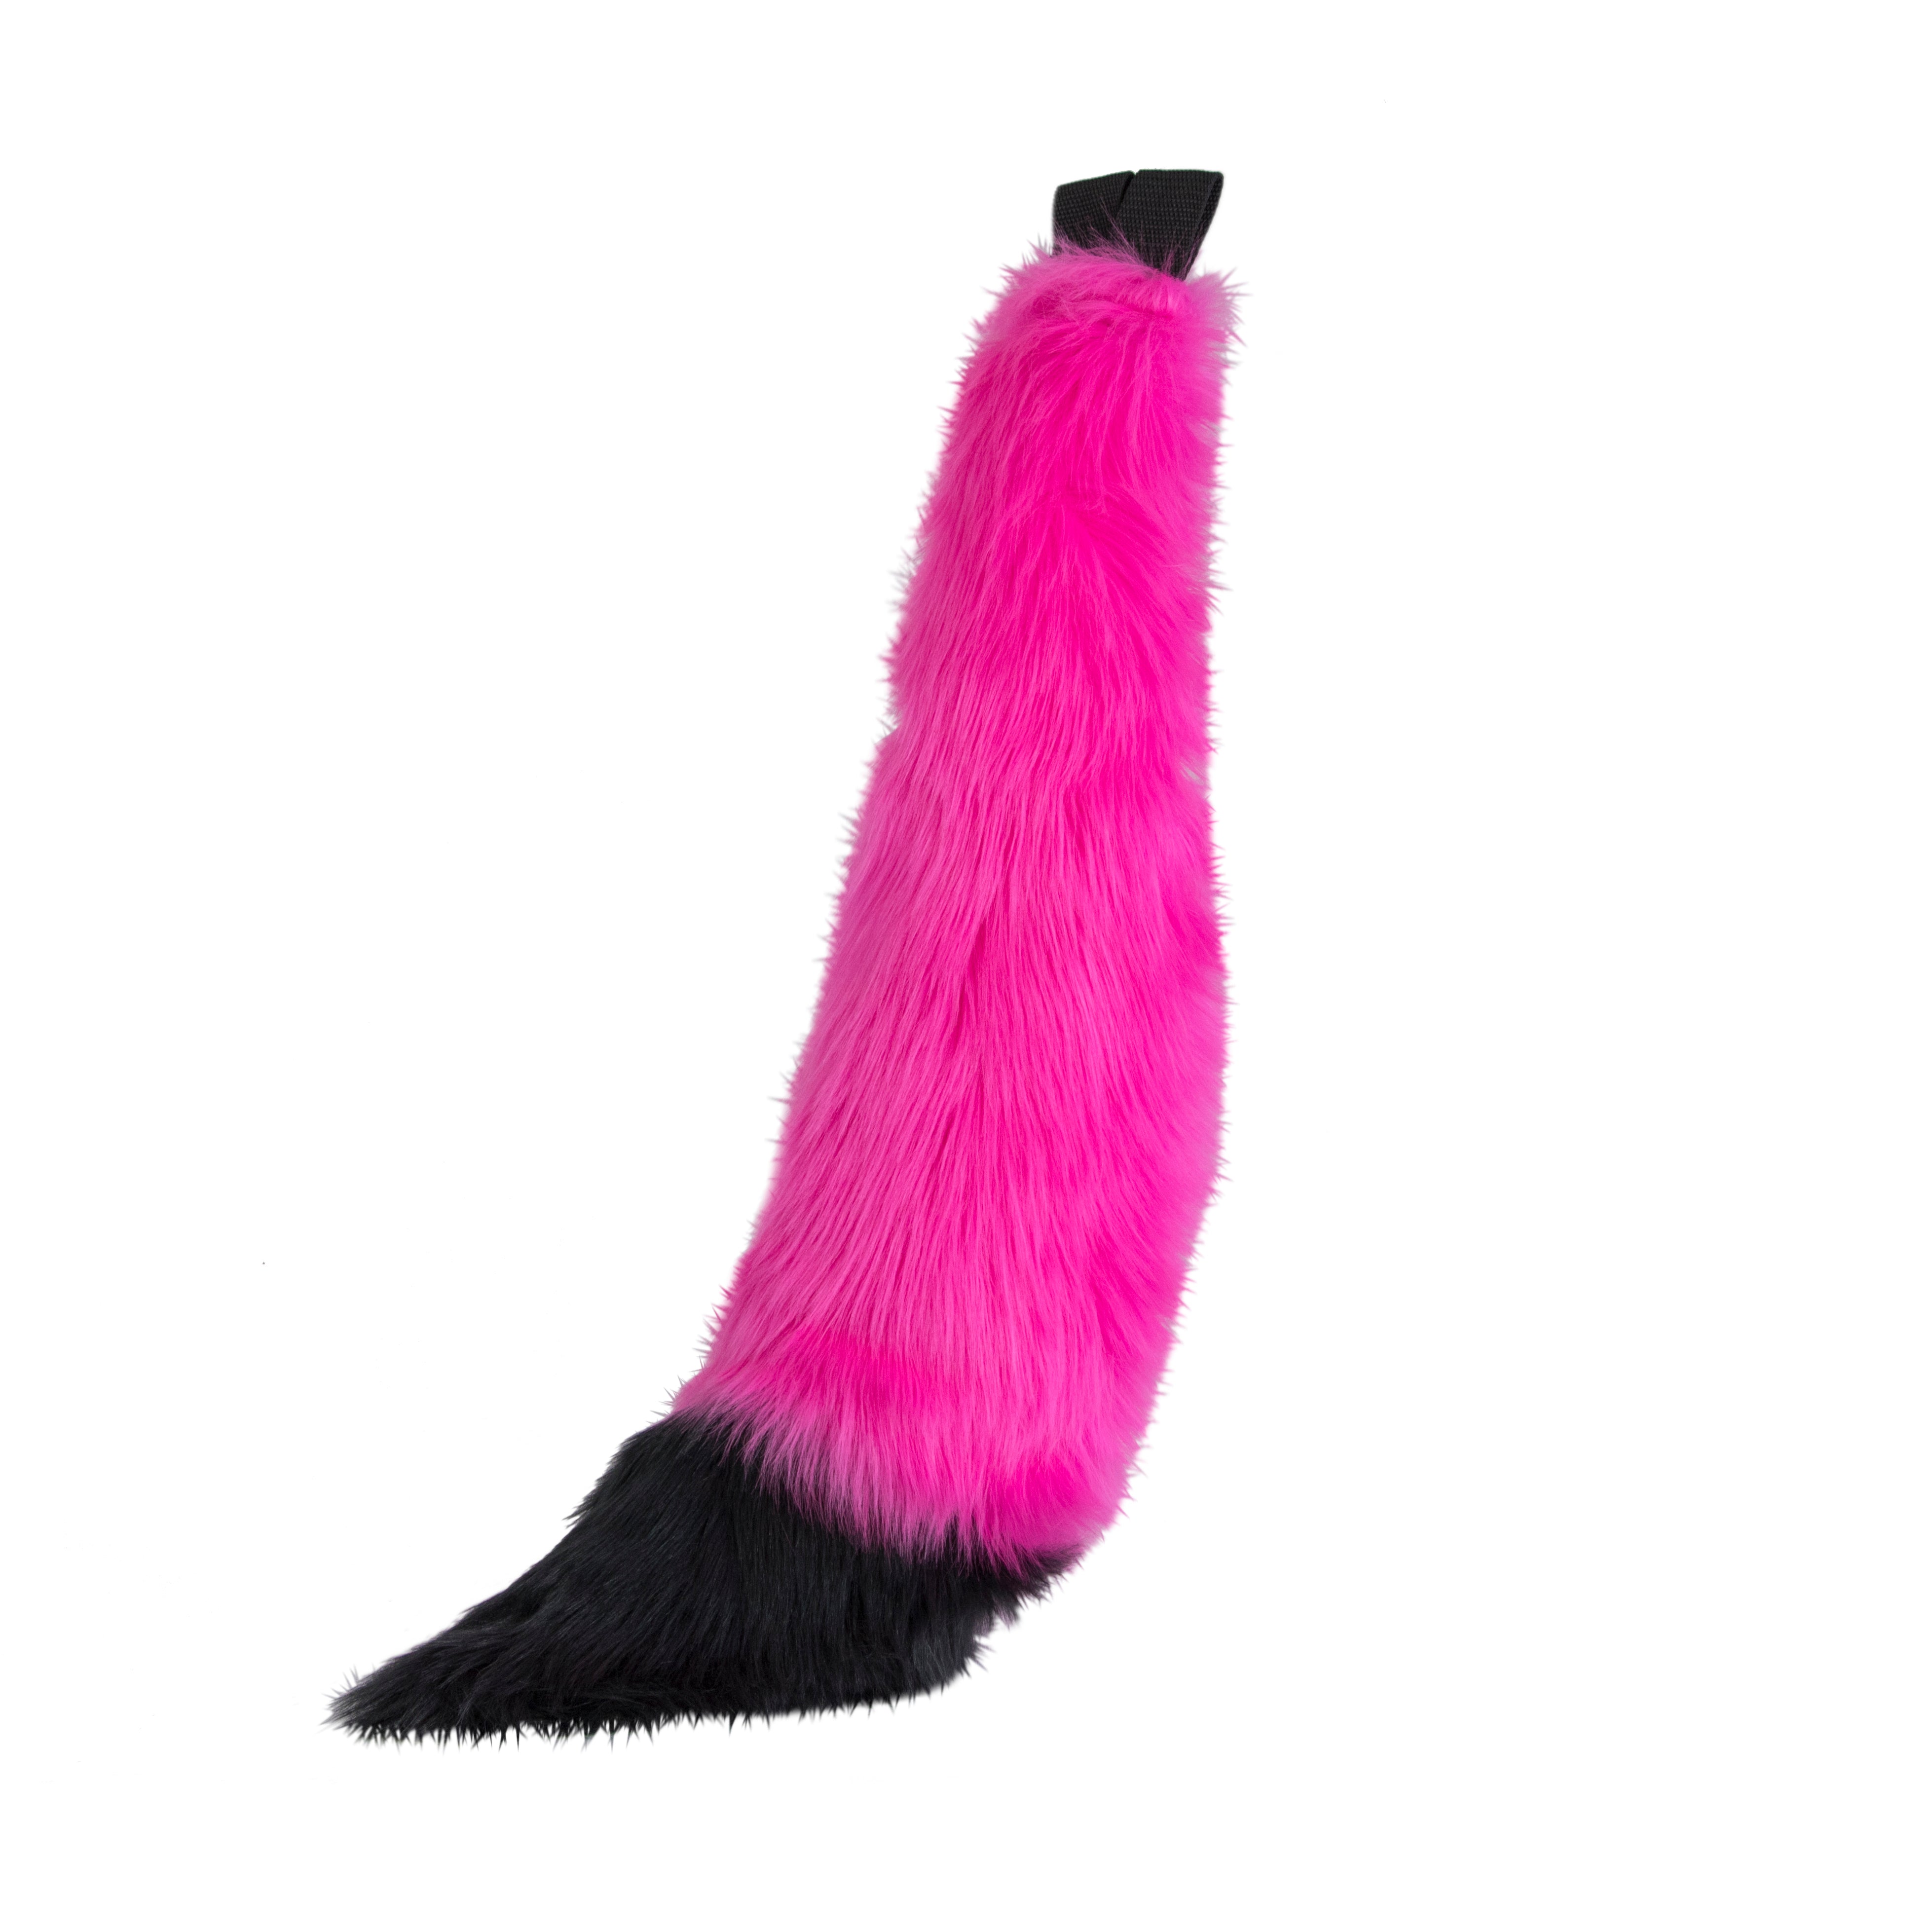 hot pink and black Pawstar furry fox tail made from vegan friendly faux fur. Great for halloween, cosplay and partial fursuits.